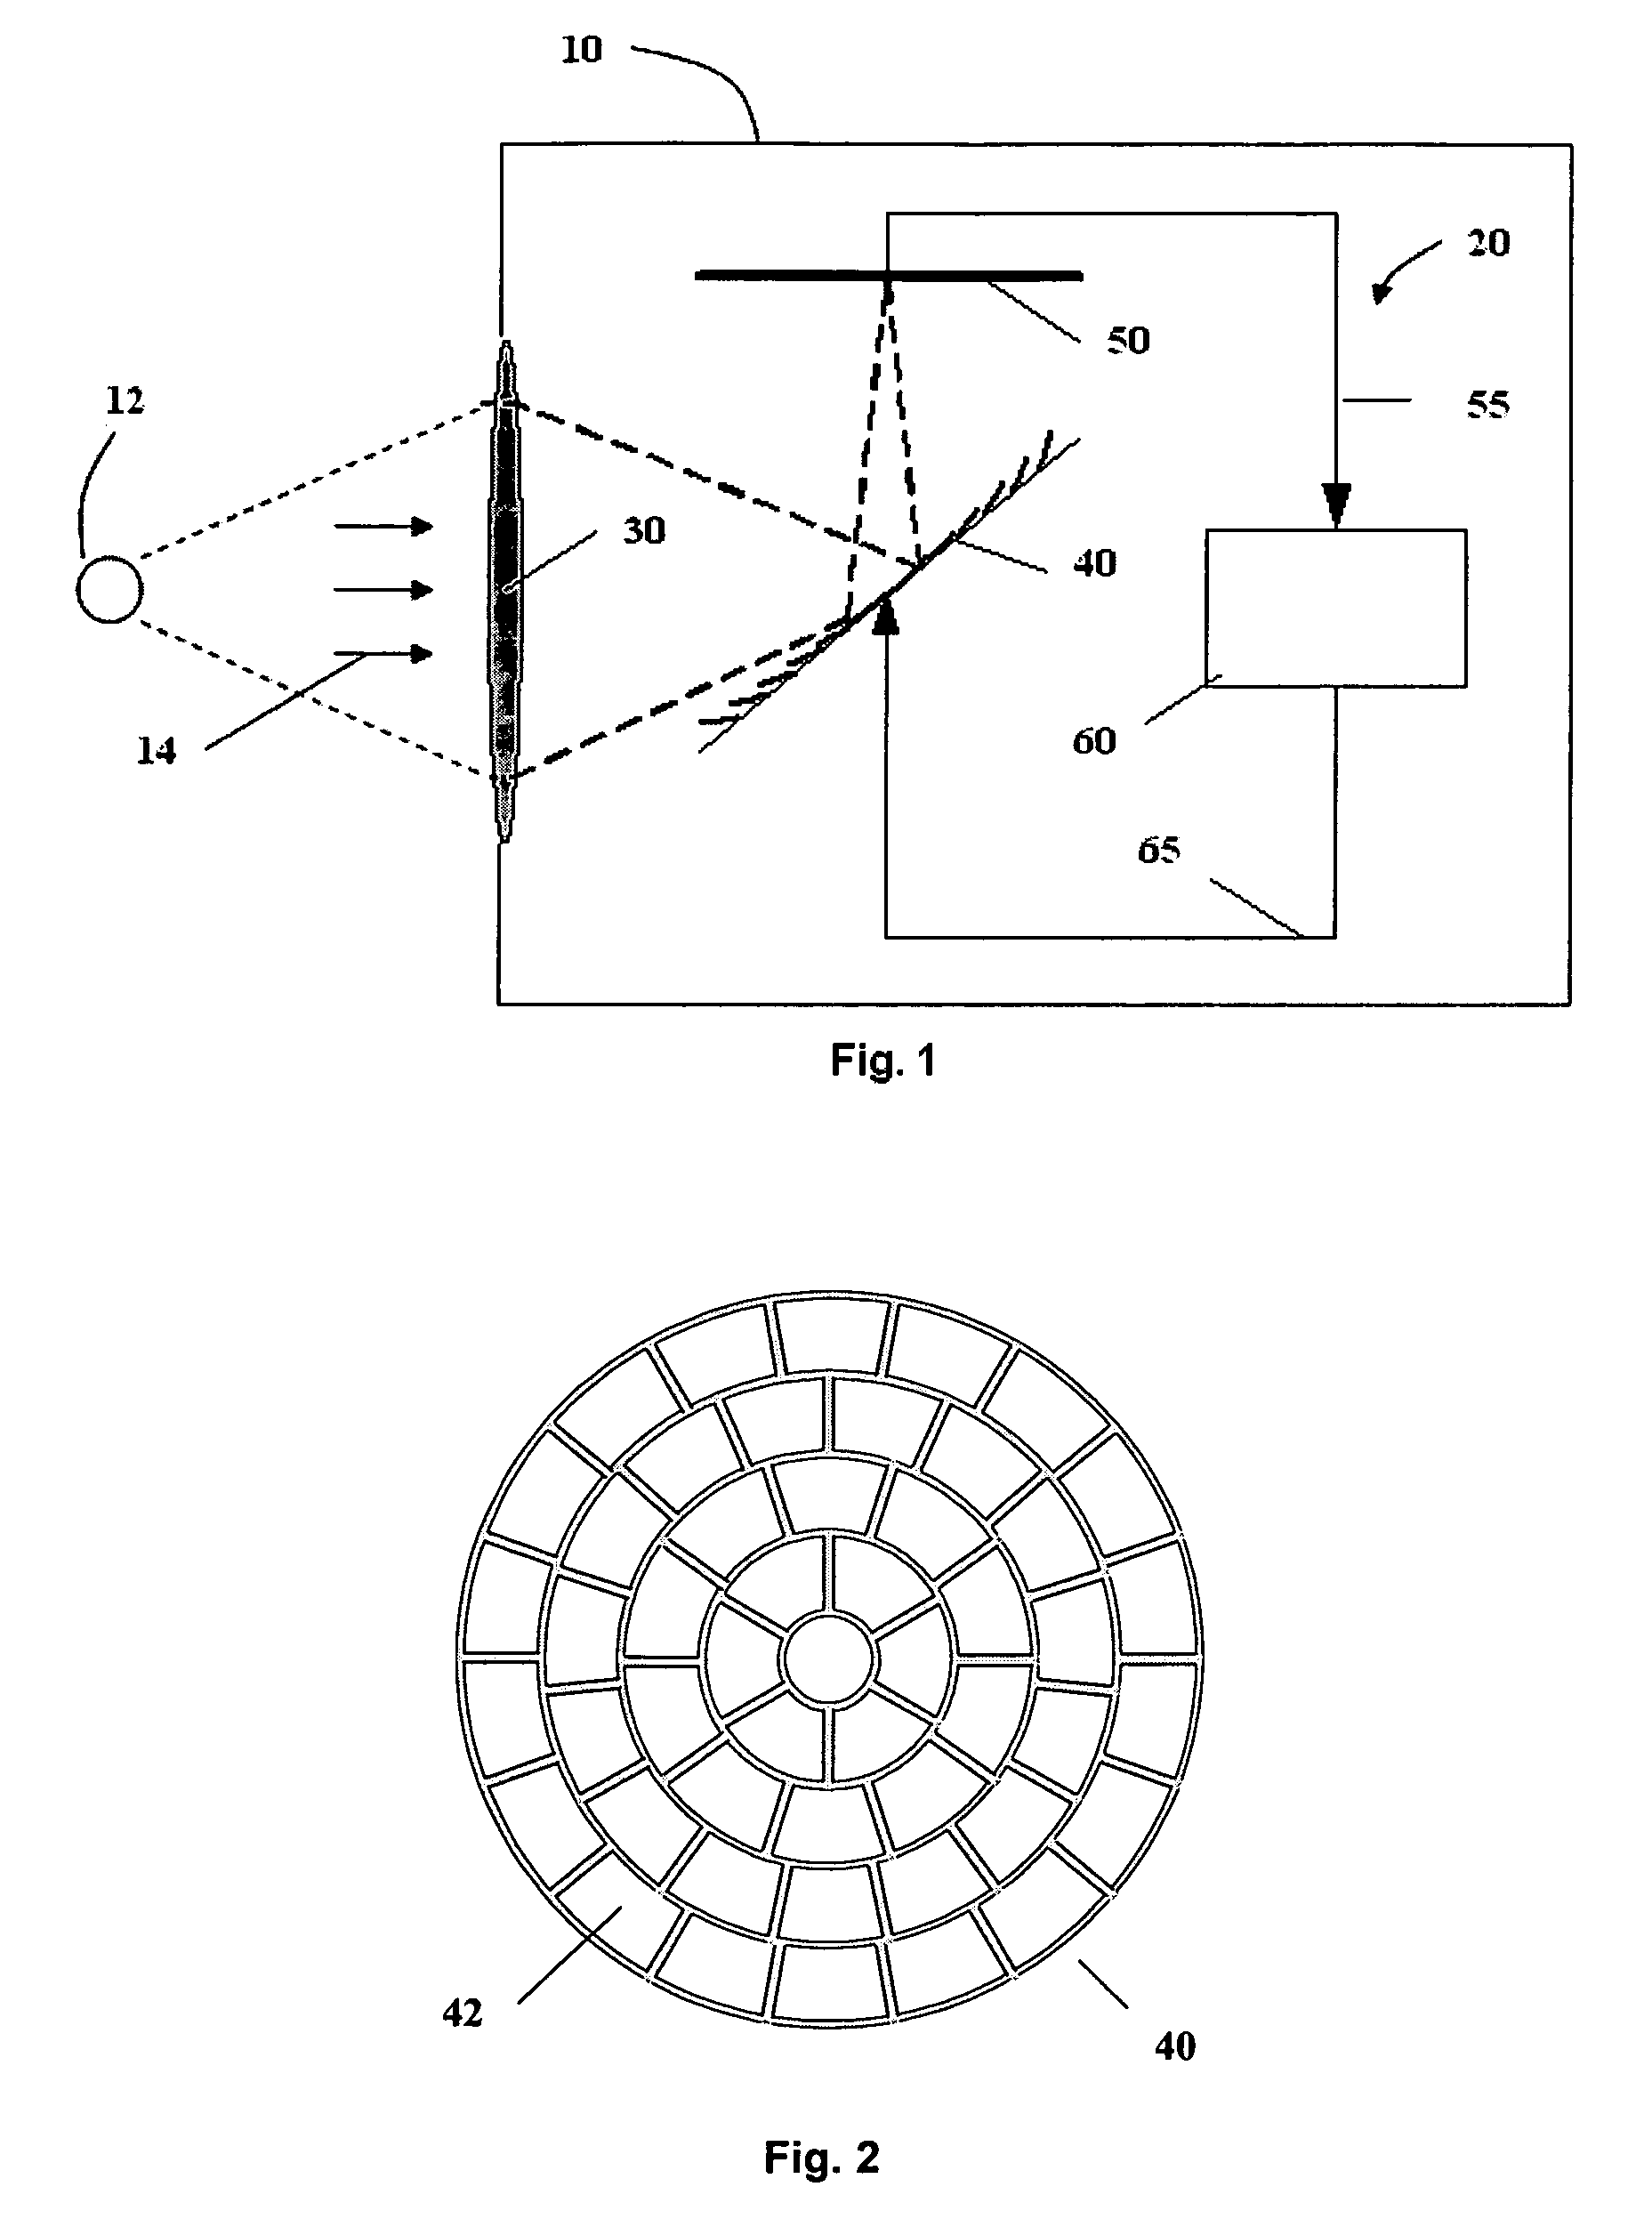 High-speed automatic focusing system